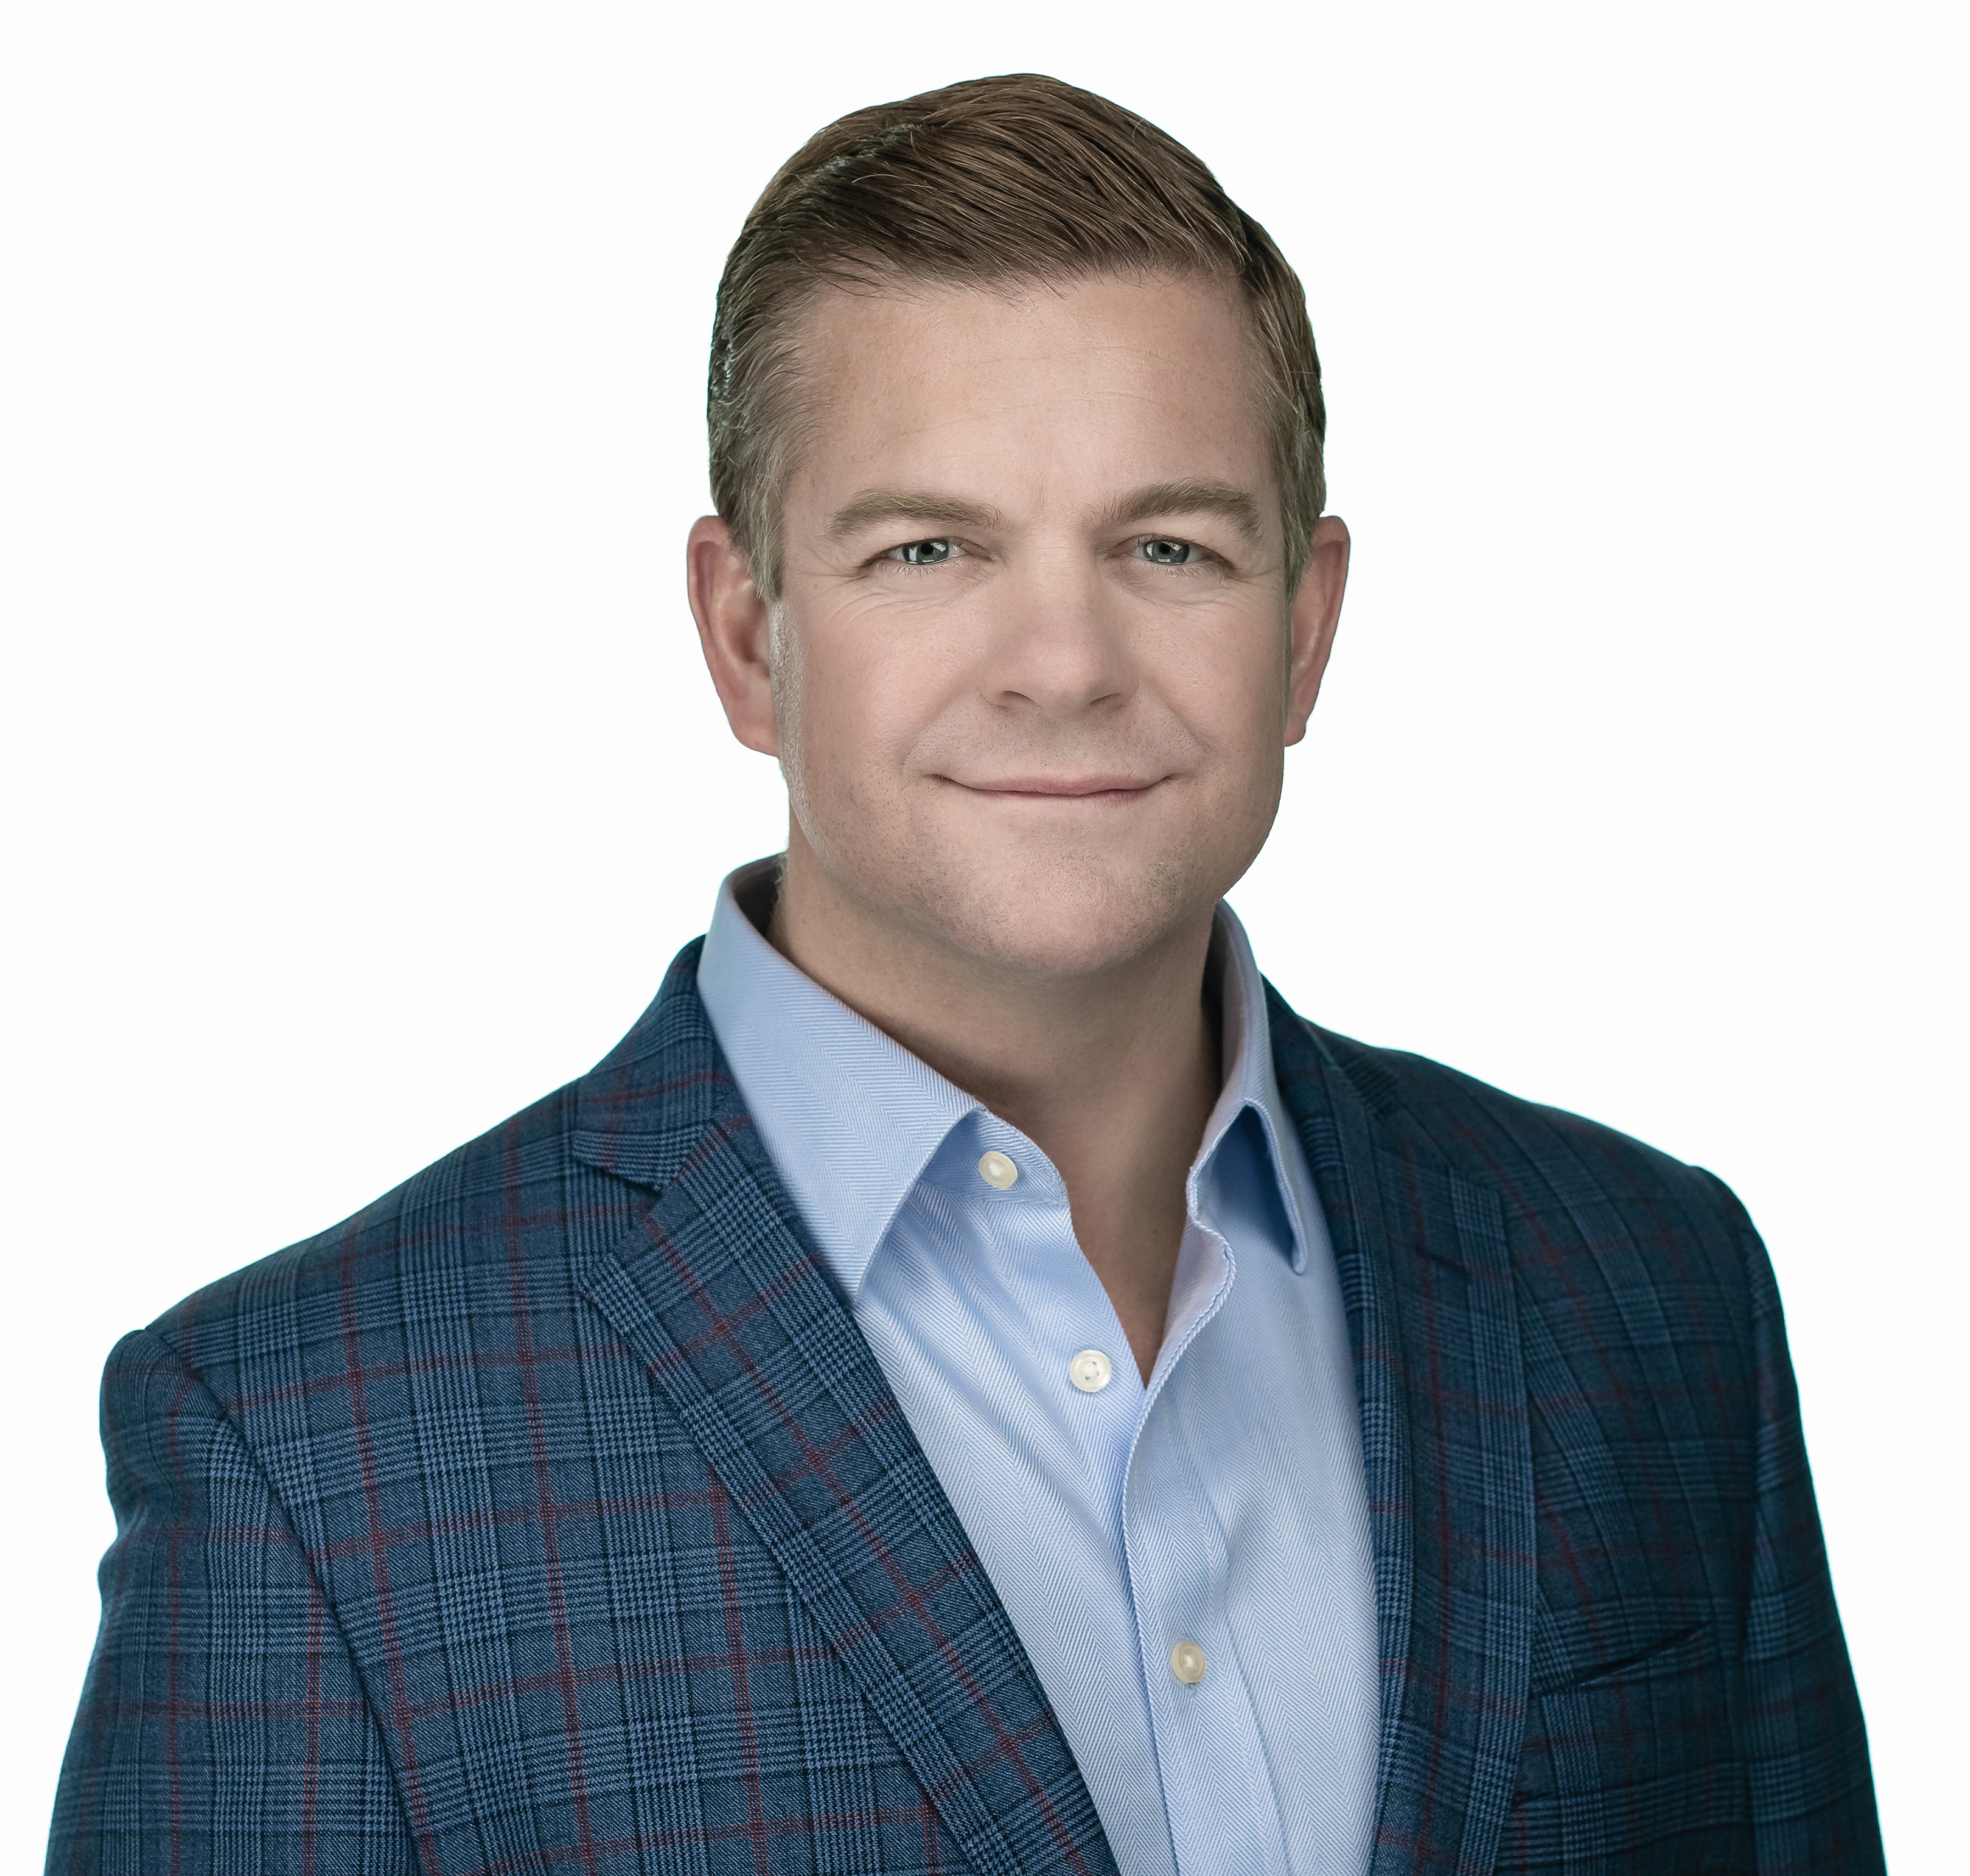 Paul Reilly is a speaker, sales trainer, author of Selling Through Tough Times (available Fall of 2021), coauthor of Value-Added Selling, fourth edition (McGraw-Hill, 2018), and host of The Q and A Sales Podcast. 